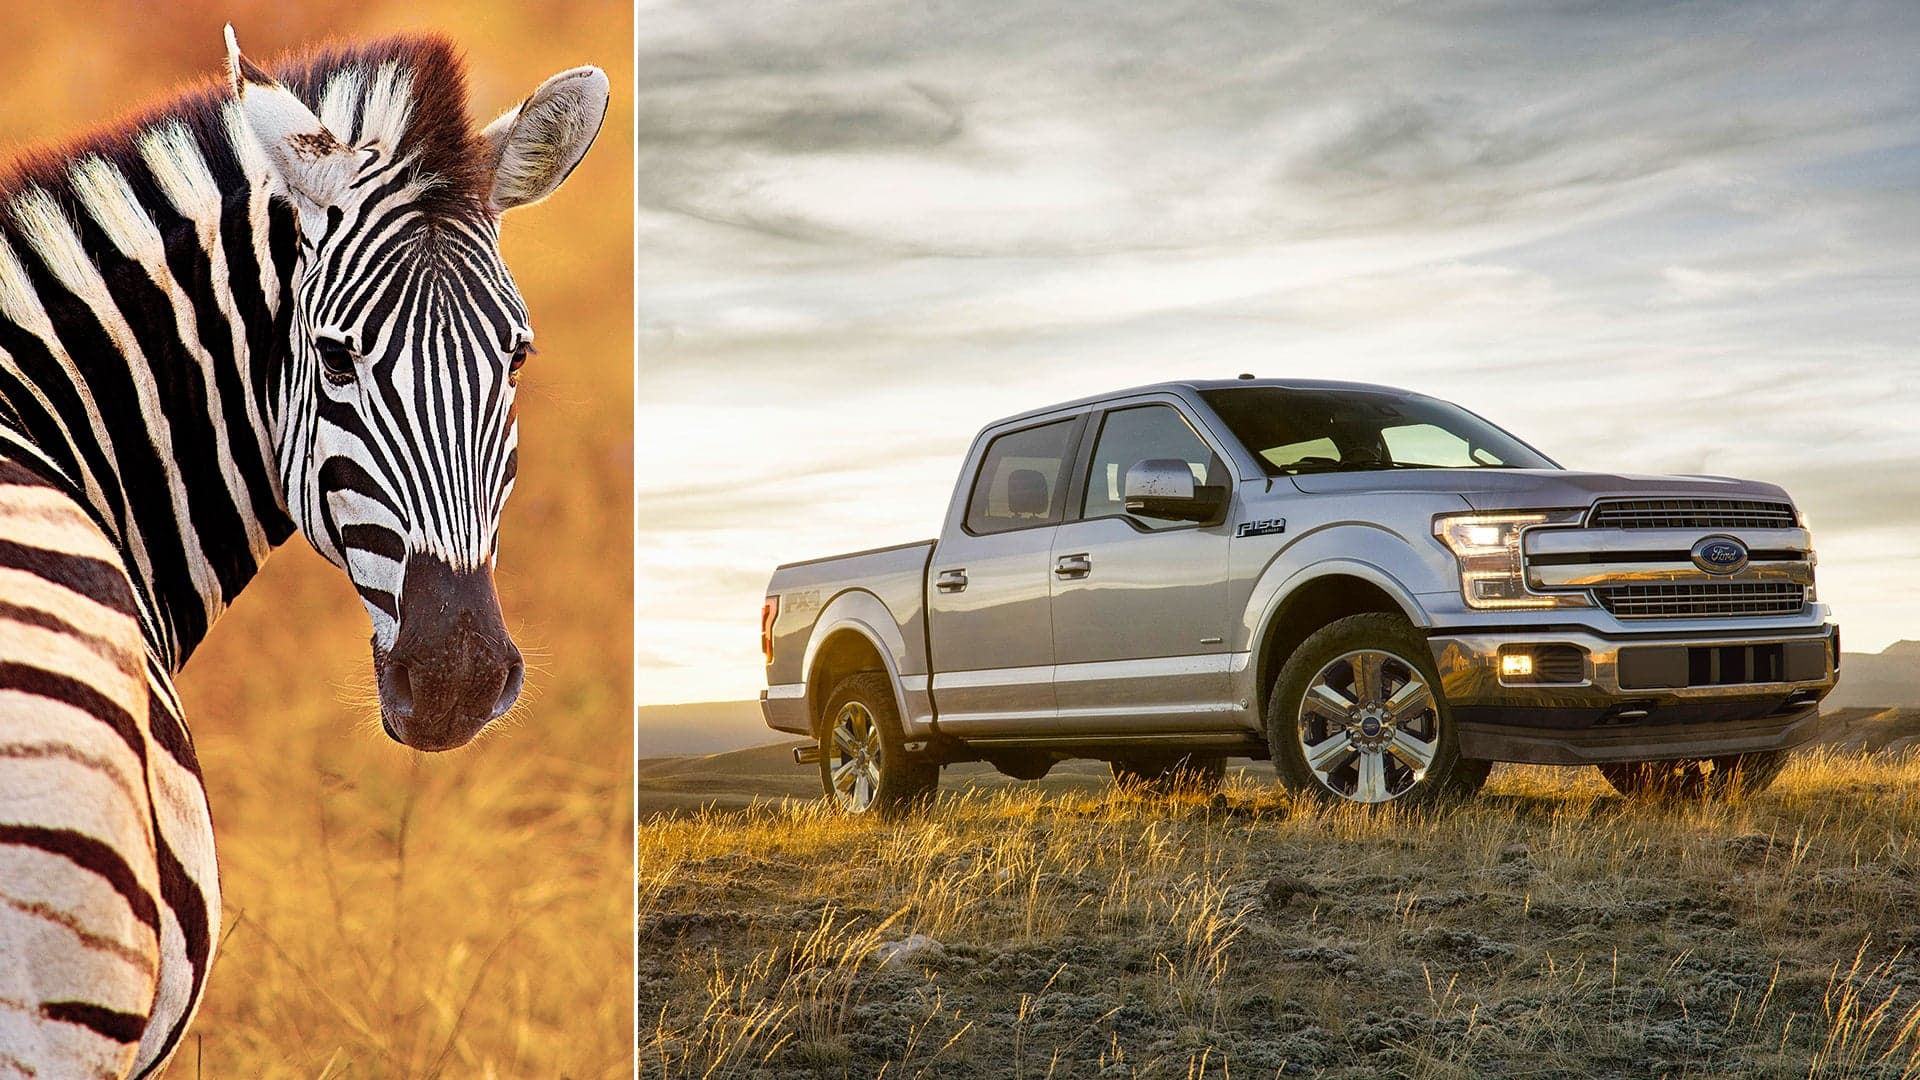 Escaped Zebra in Florida Hits Ford F-150 During Dash for Freedom